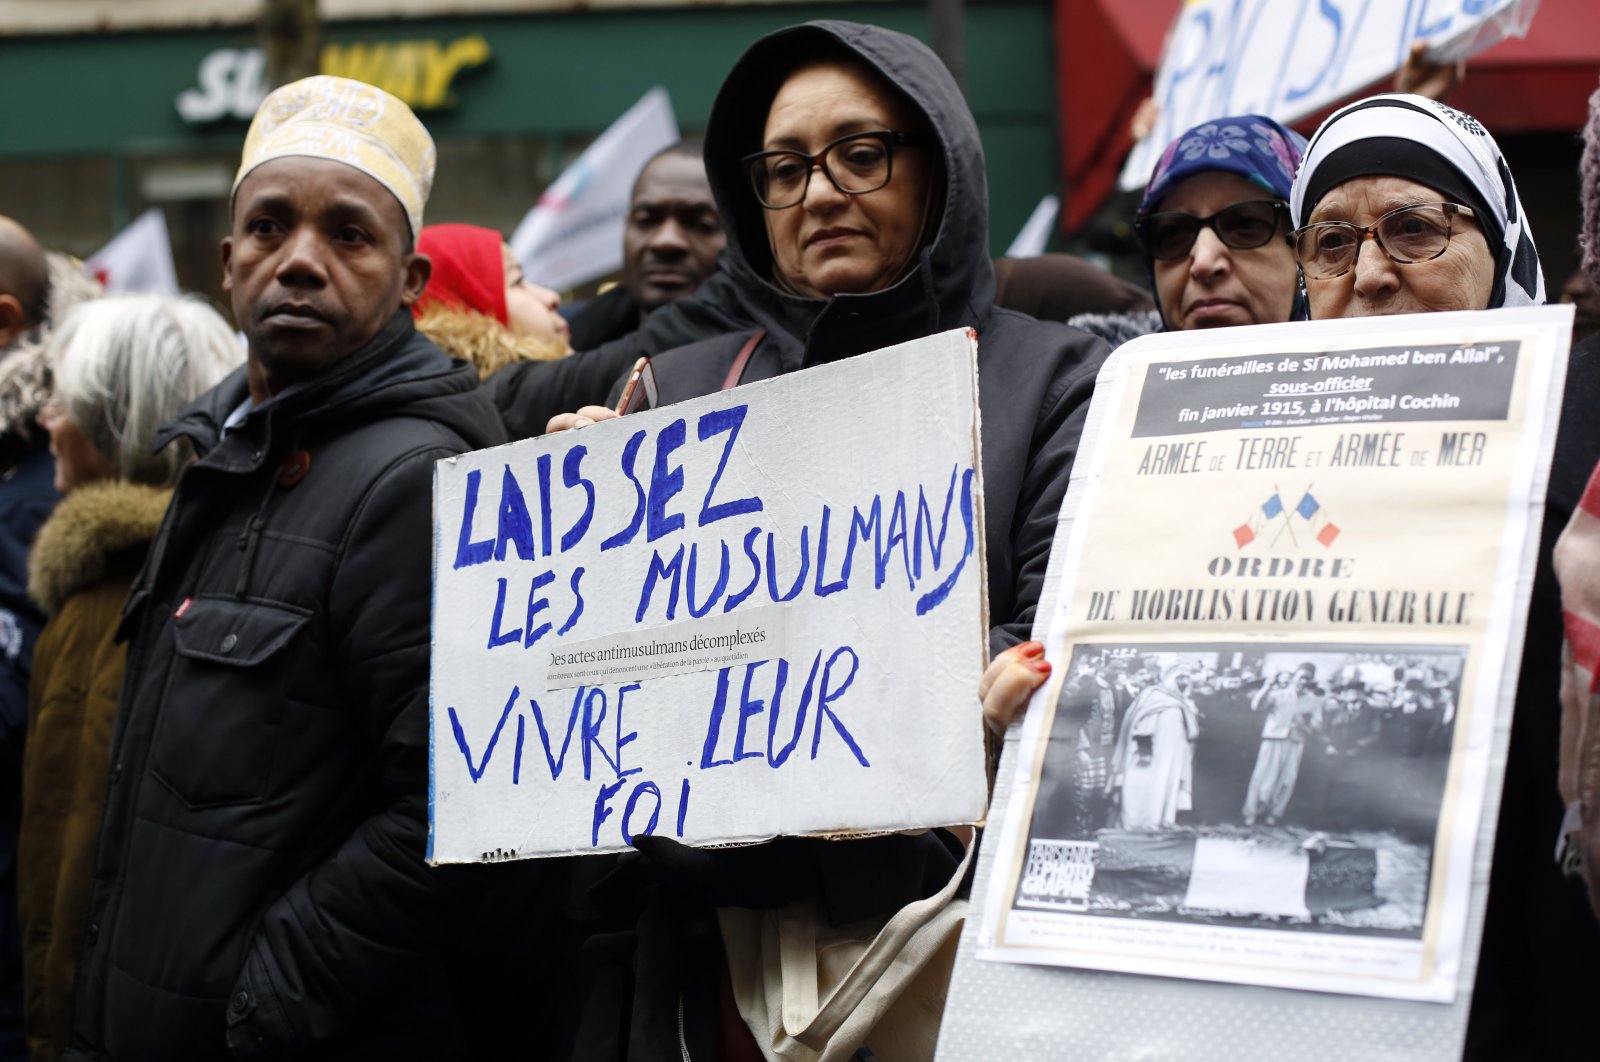 Protestors hold placards during a demonstration against islamophobia, in Paris, Sunday, Nov. 10, 2019. The placard on the left reads: "Let Muslims live their faith." (AP File Photo)